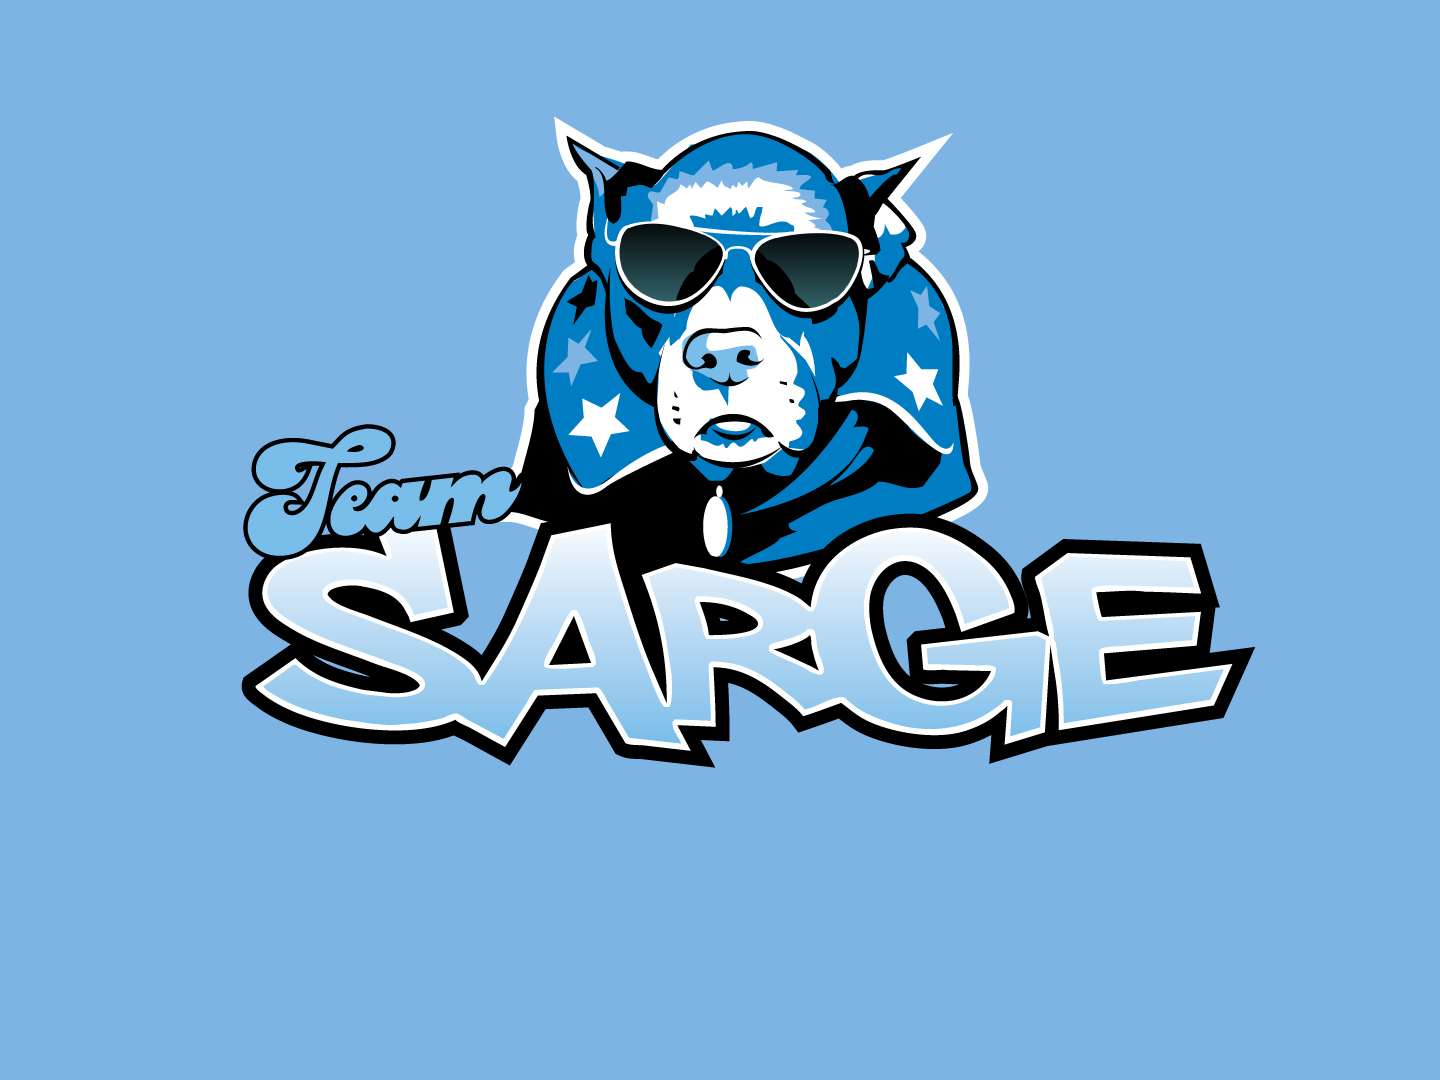 Team Sarge Shirts Are Here! Proceeds Support PAWS Sarge Fund.